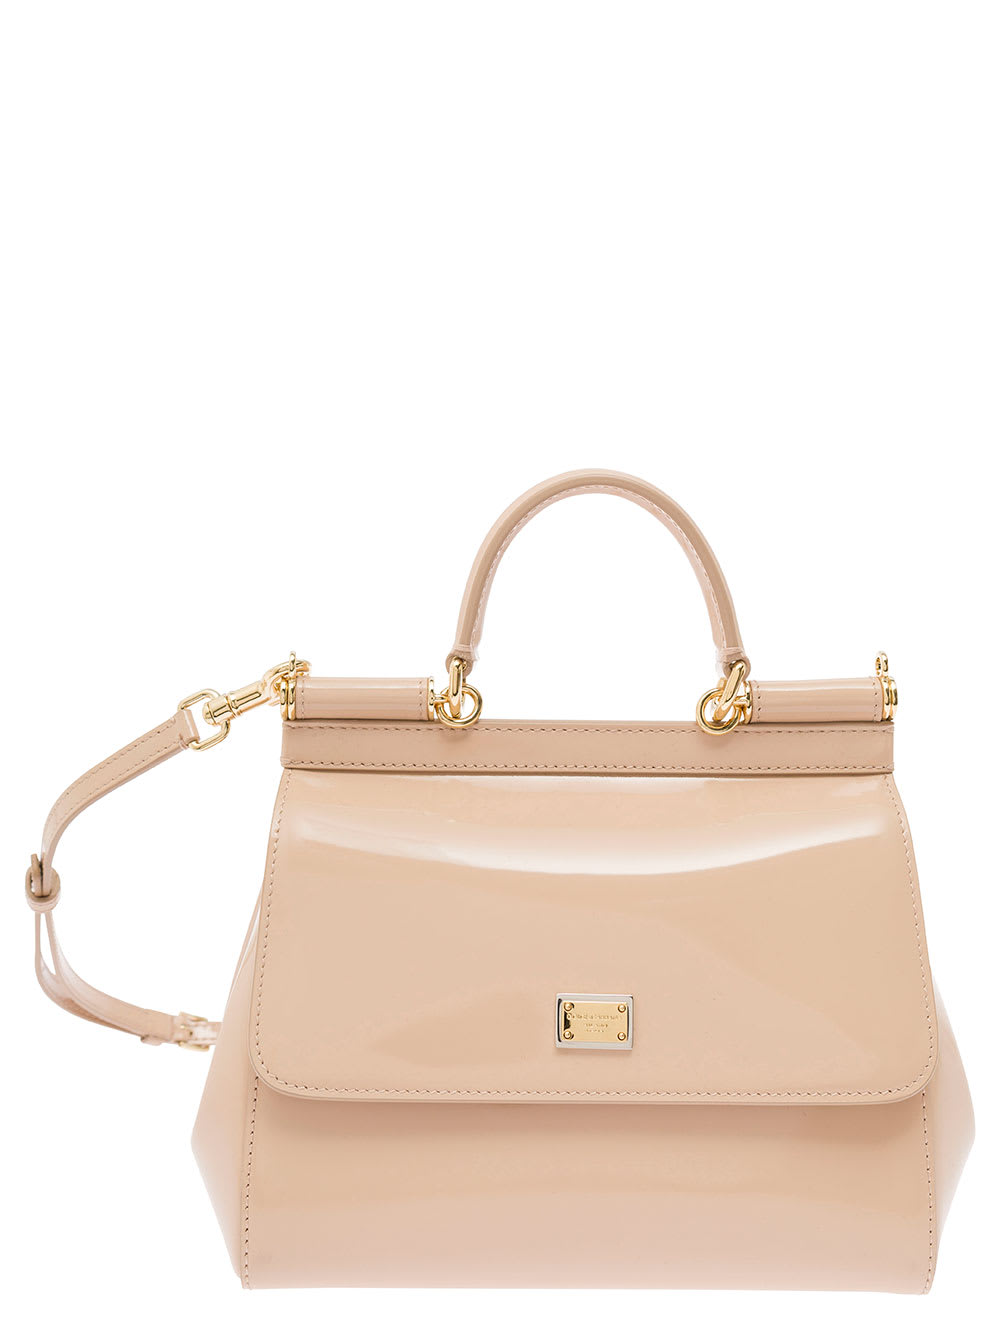 DOLCE & GABBANA SICILY BEIGE HANDBAG WITH LOGO PLAQUE IN PATENT LEATHER WOMAN